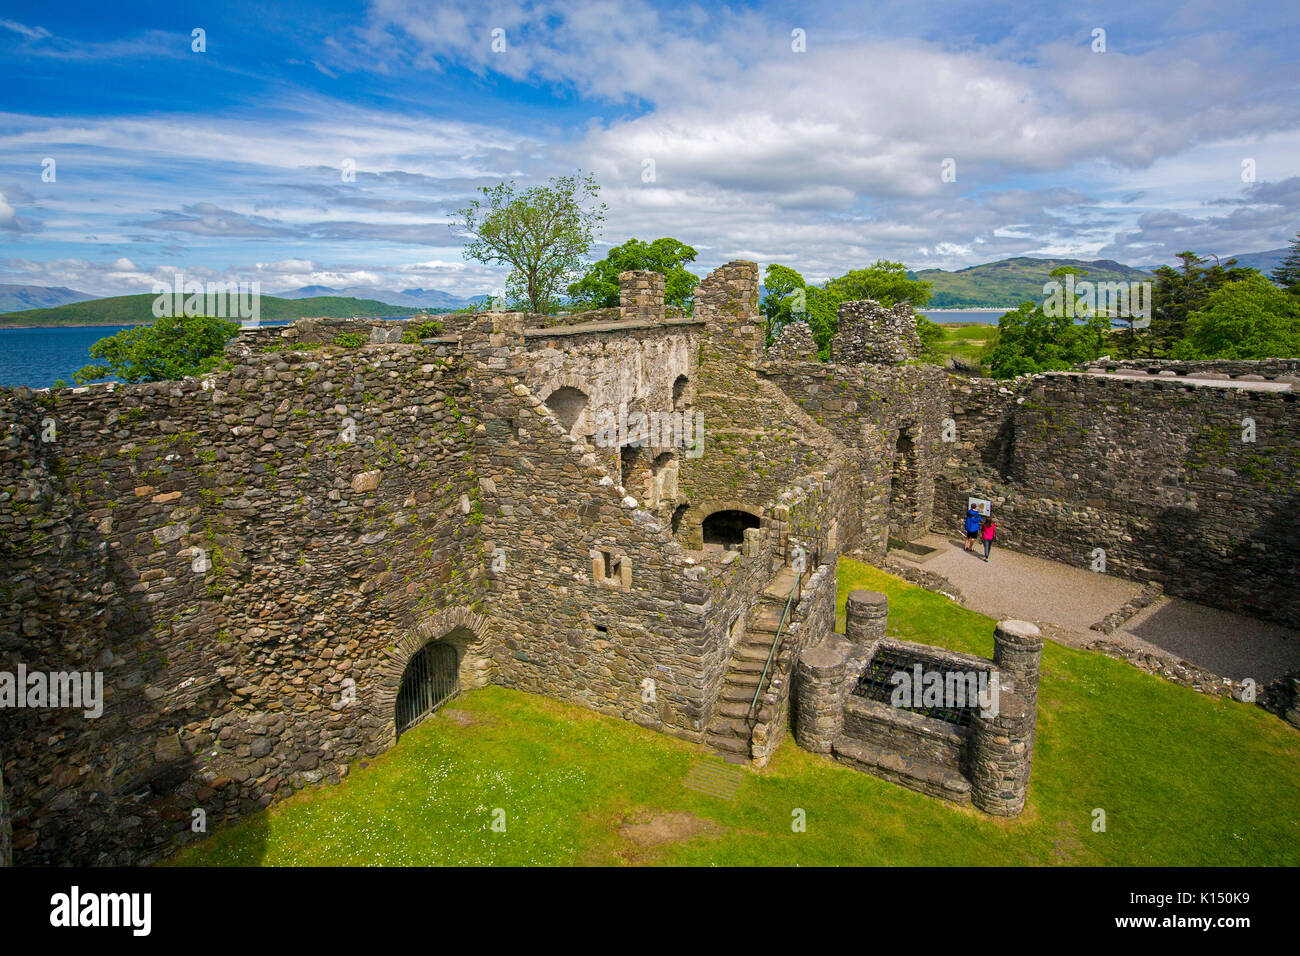 Interior of historic 13th century Dunstaffnage castle, near Oban in Scotland, under blue sky with mountains and waters of Firth of Lorn in background Stock Photo